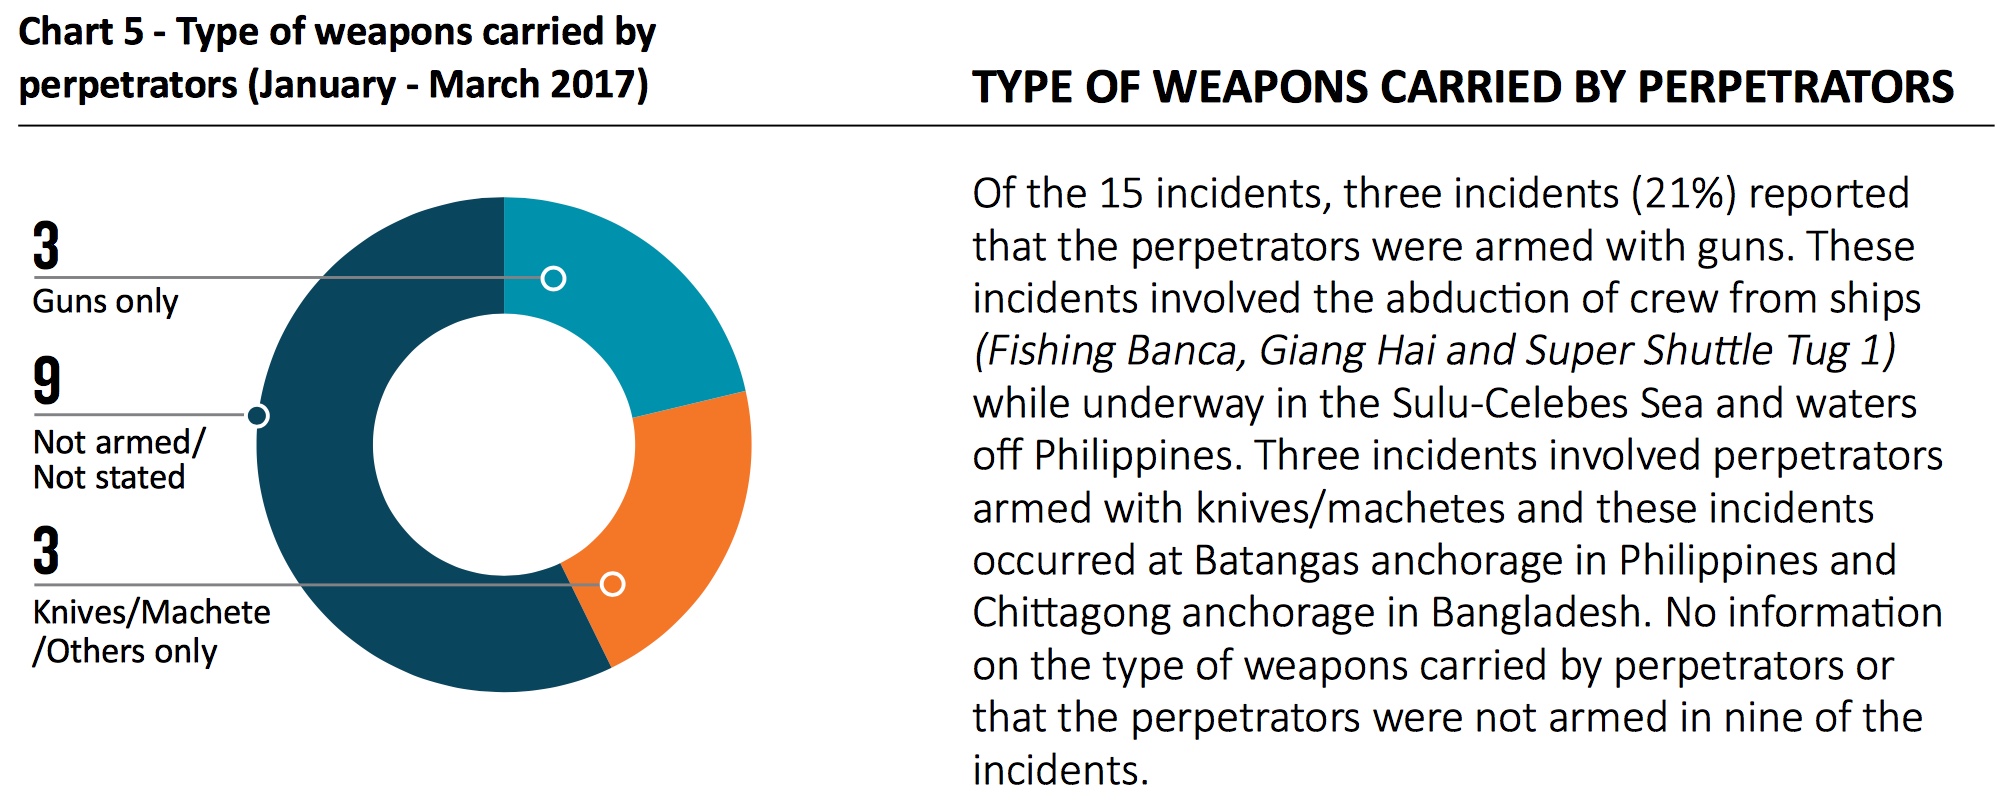 Type of Weapons Carried - ReCAAP ISC